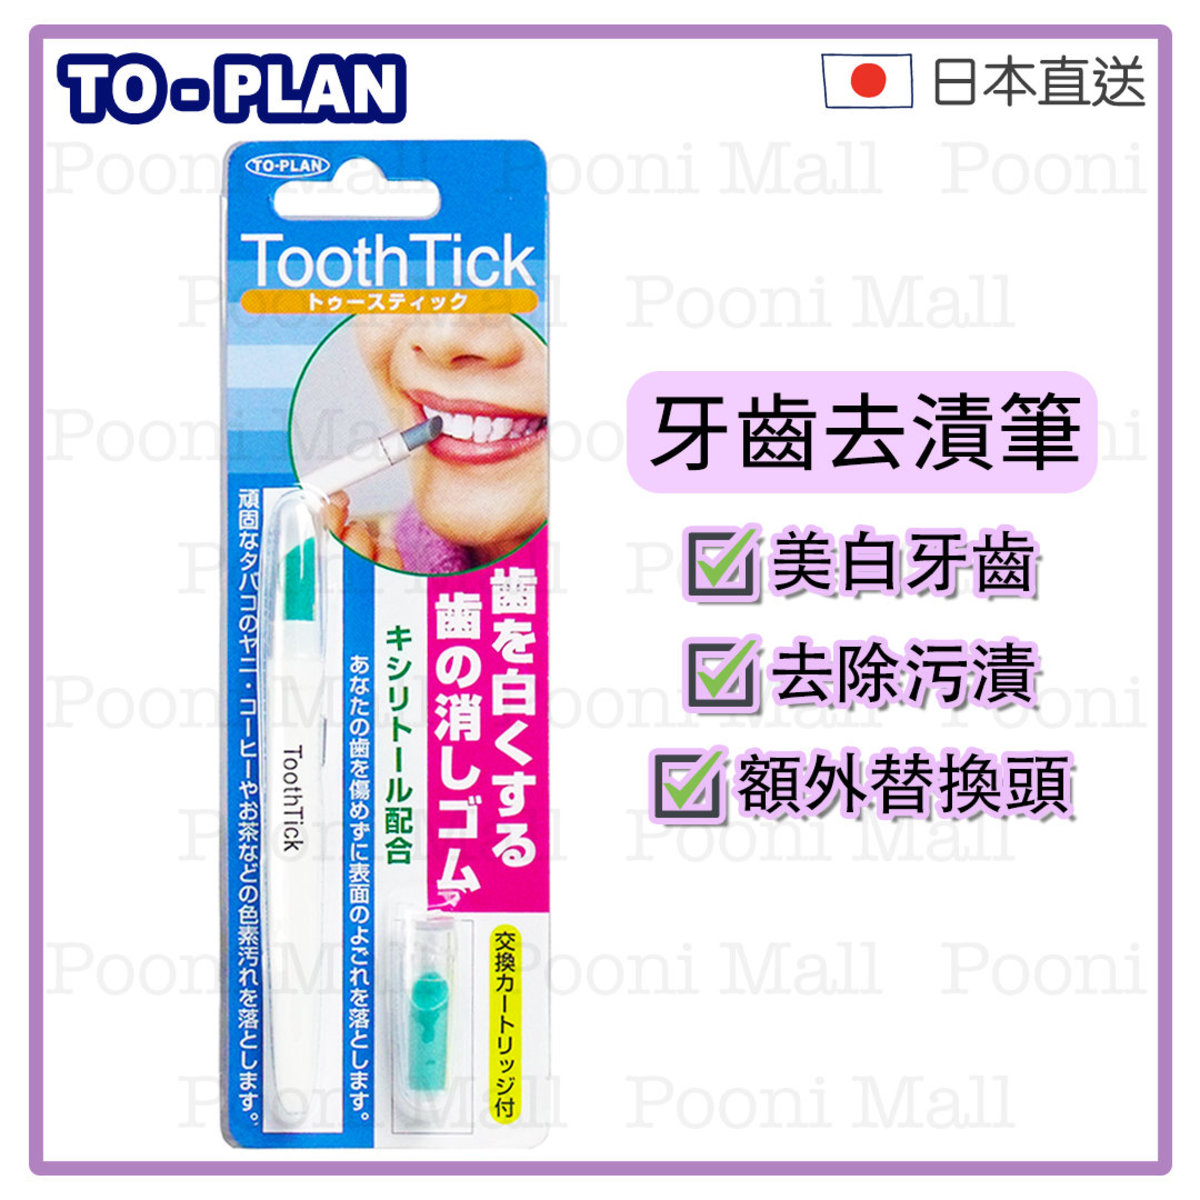 To-Plan | Whitening and Cleaning Toothtick (Parallel Import) | HKTVmall The  Largest HK Shopping Platform